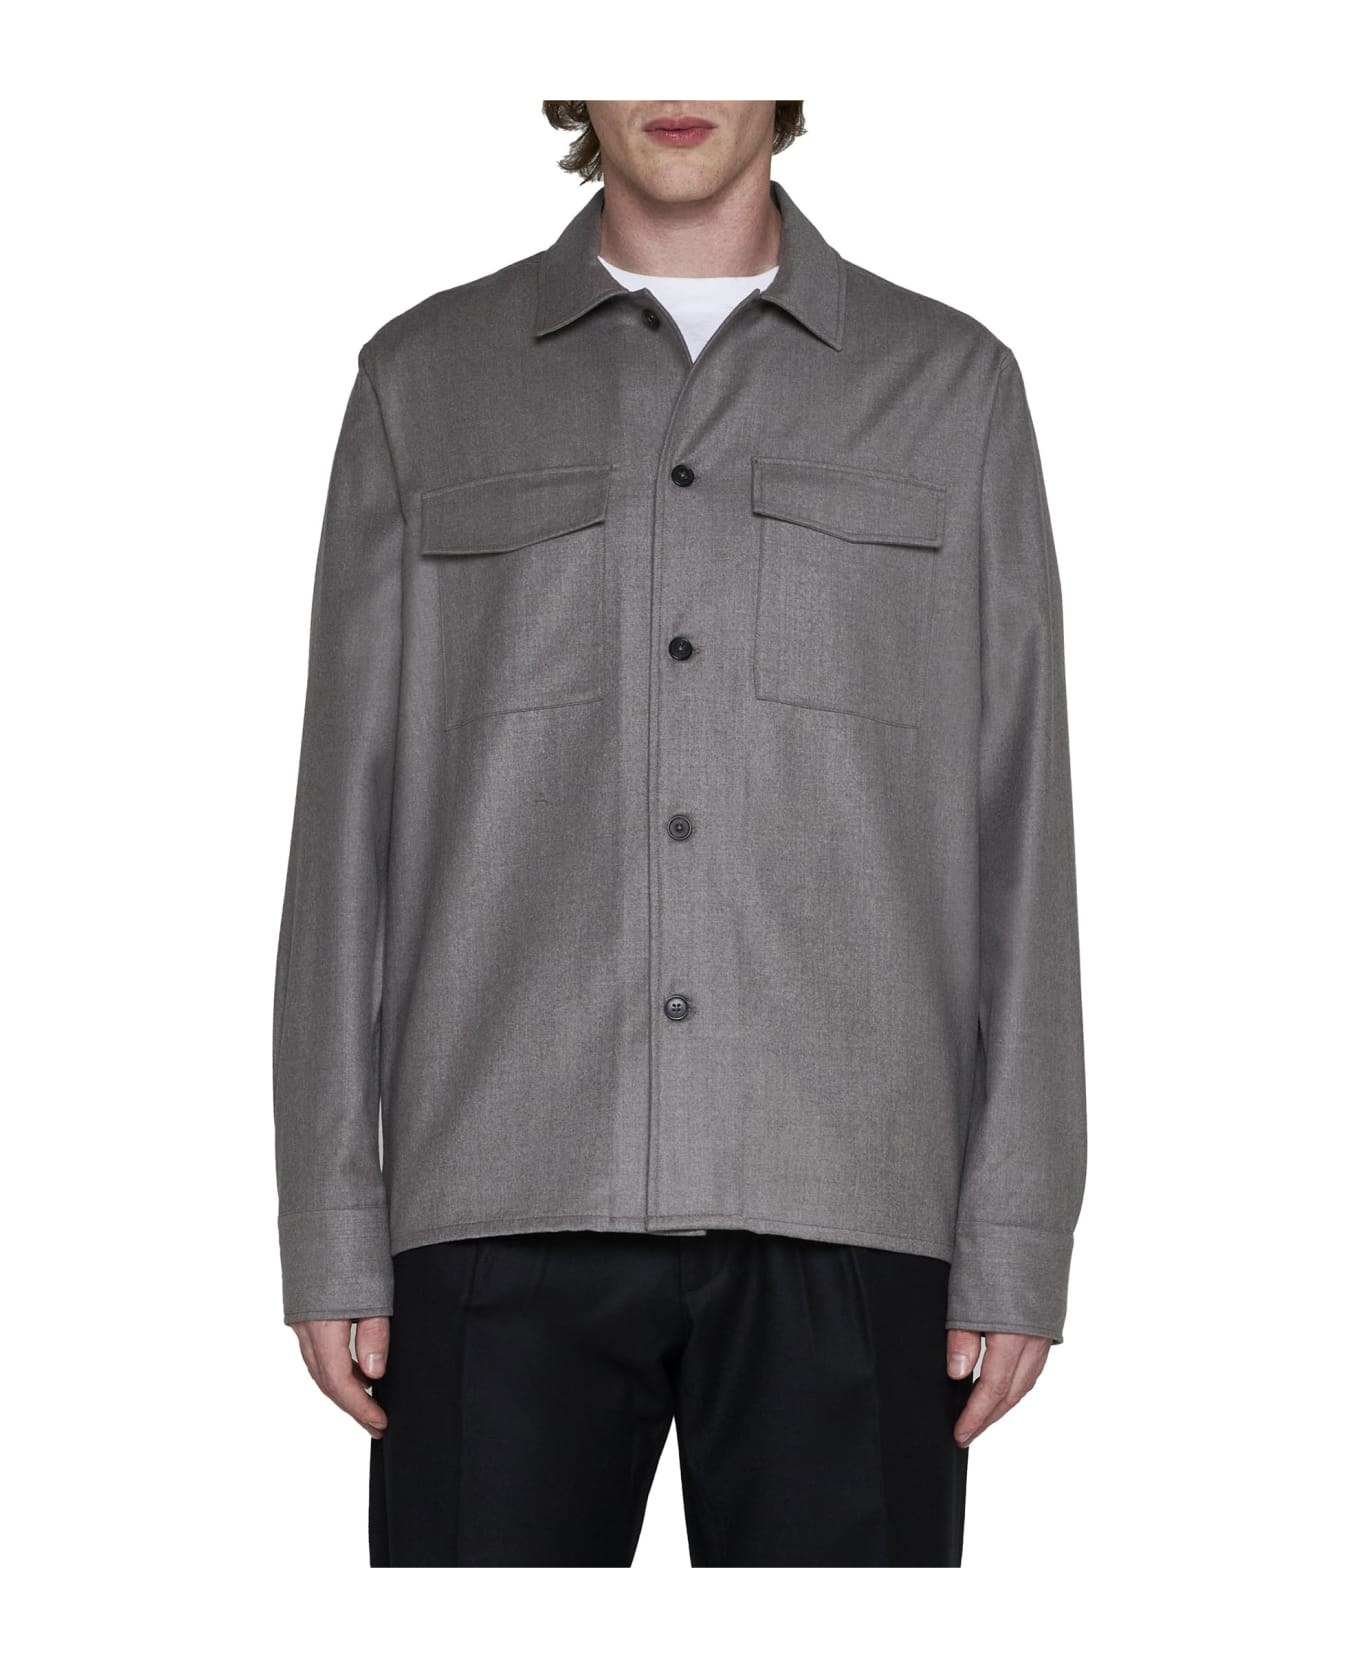 Low Brand Shirt - Taupe